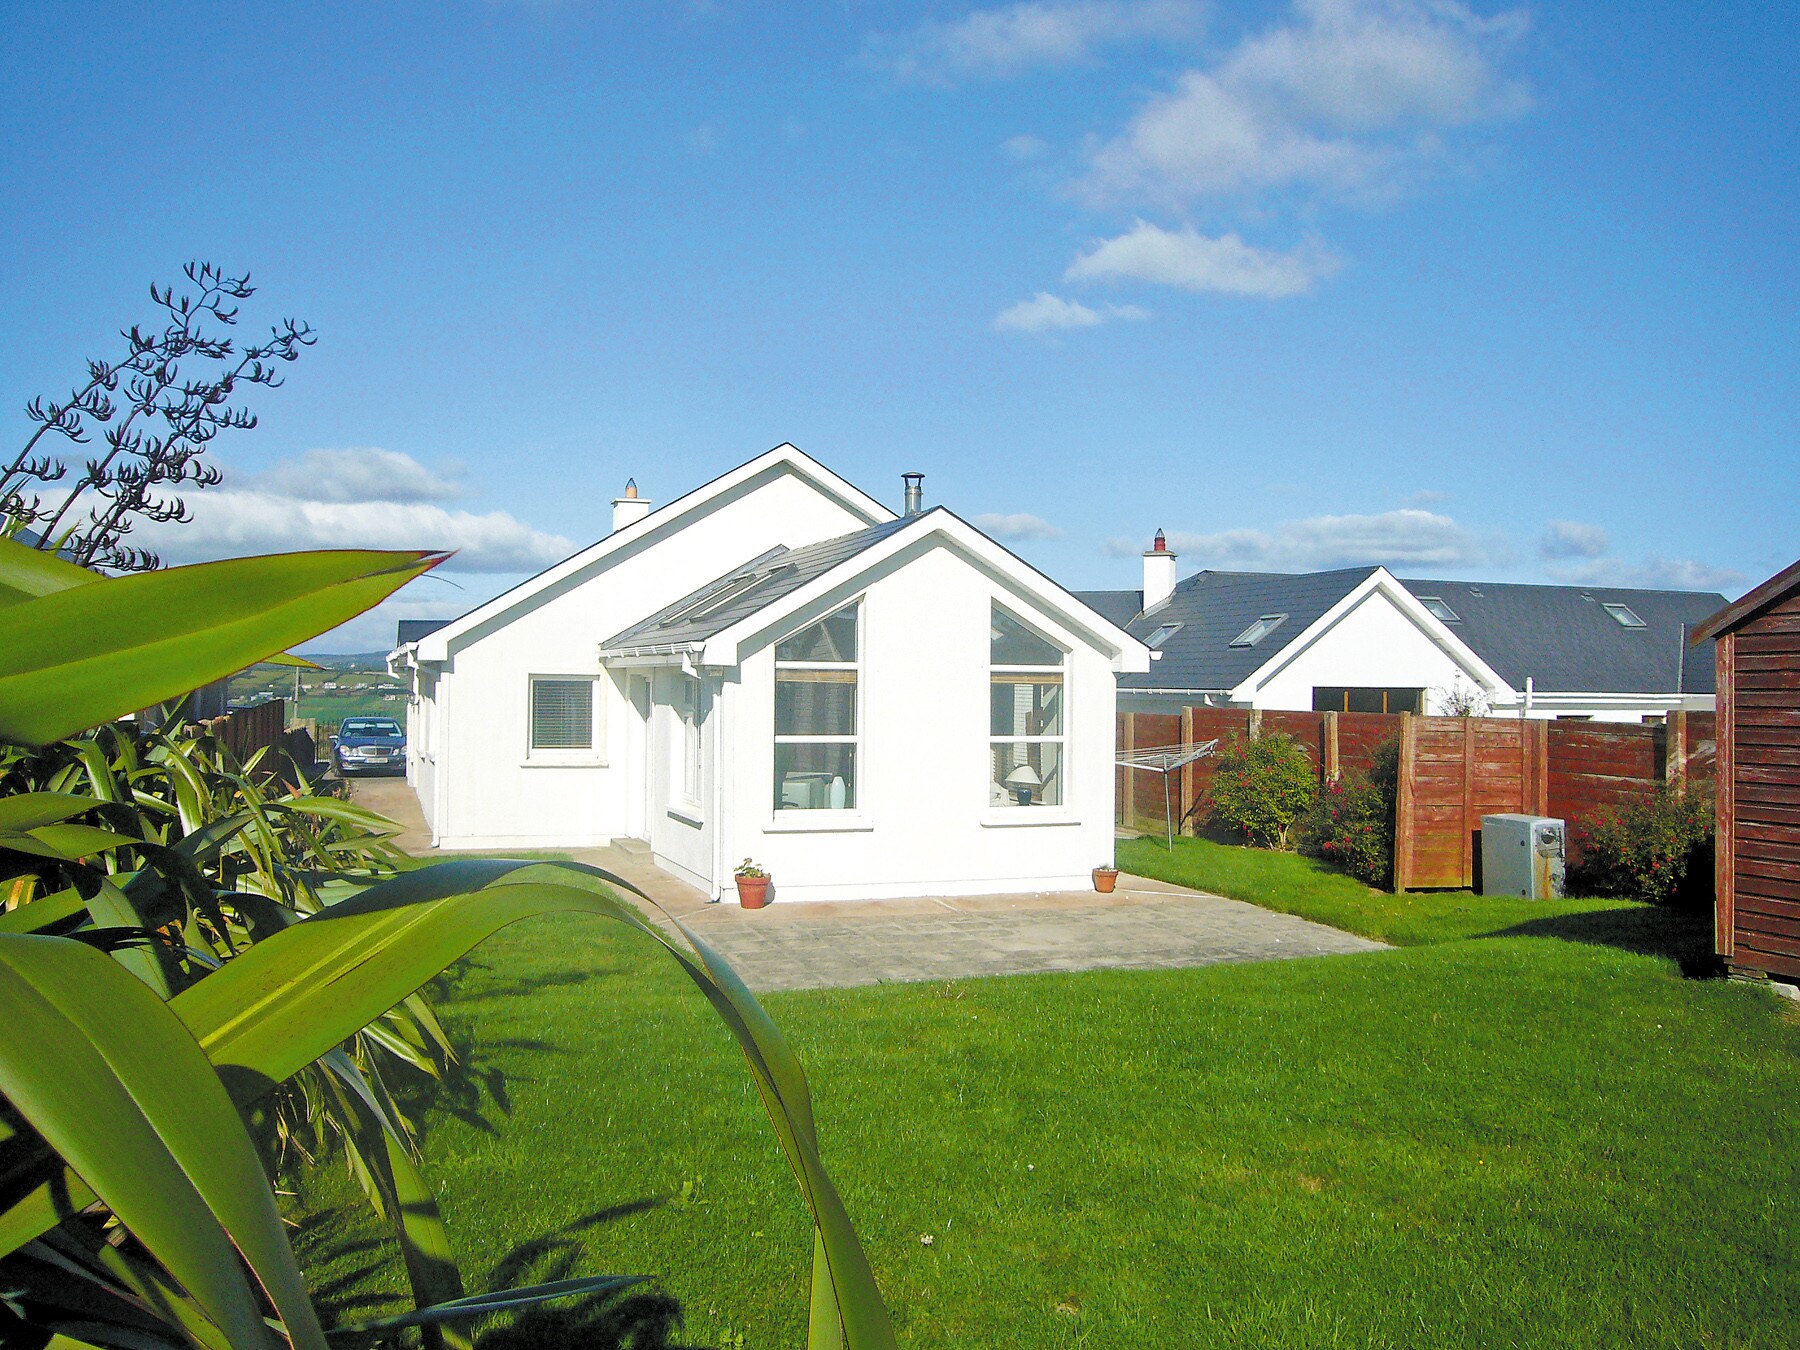 Dacha Holiday Home, Ardmore, County Waterford